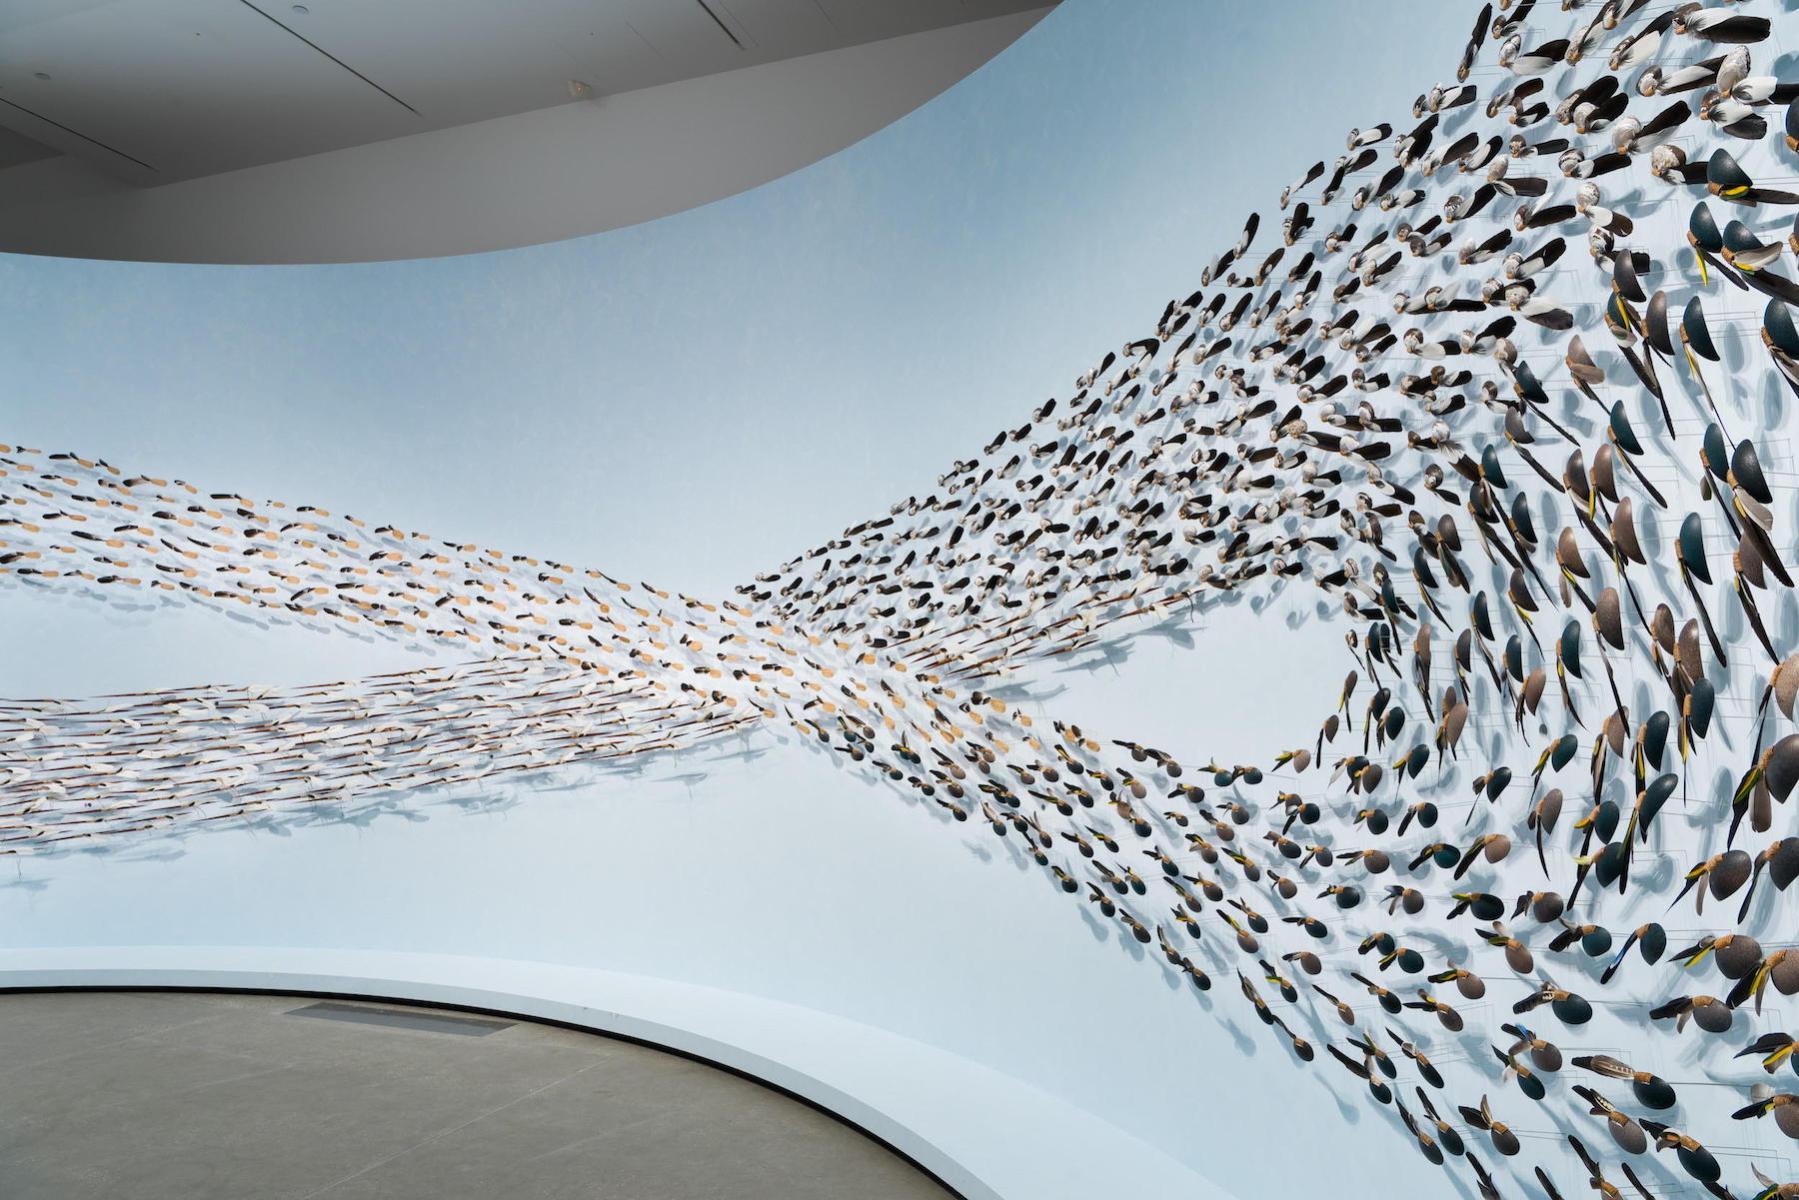 An installation of shells and feathers arranged in an infinity symbol shape fills a blue and cuved gallery wall